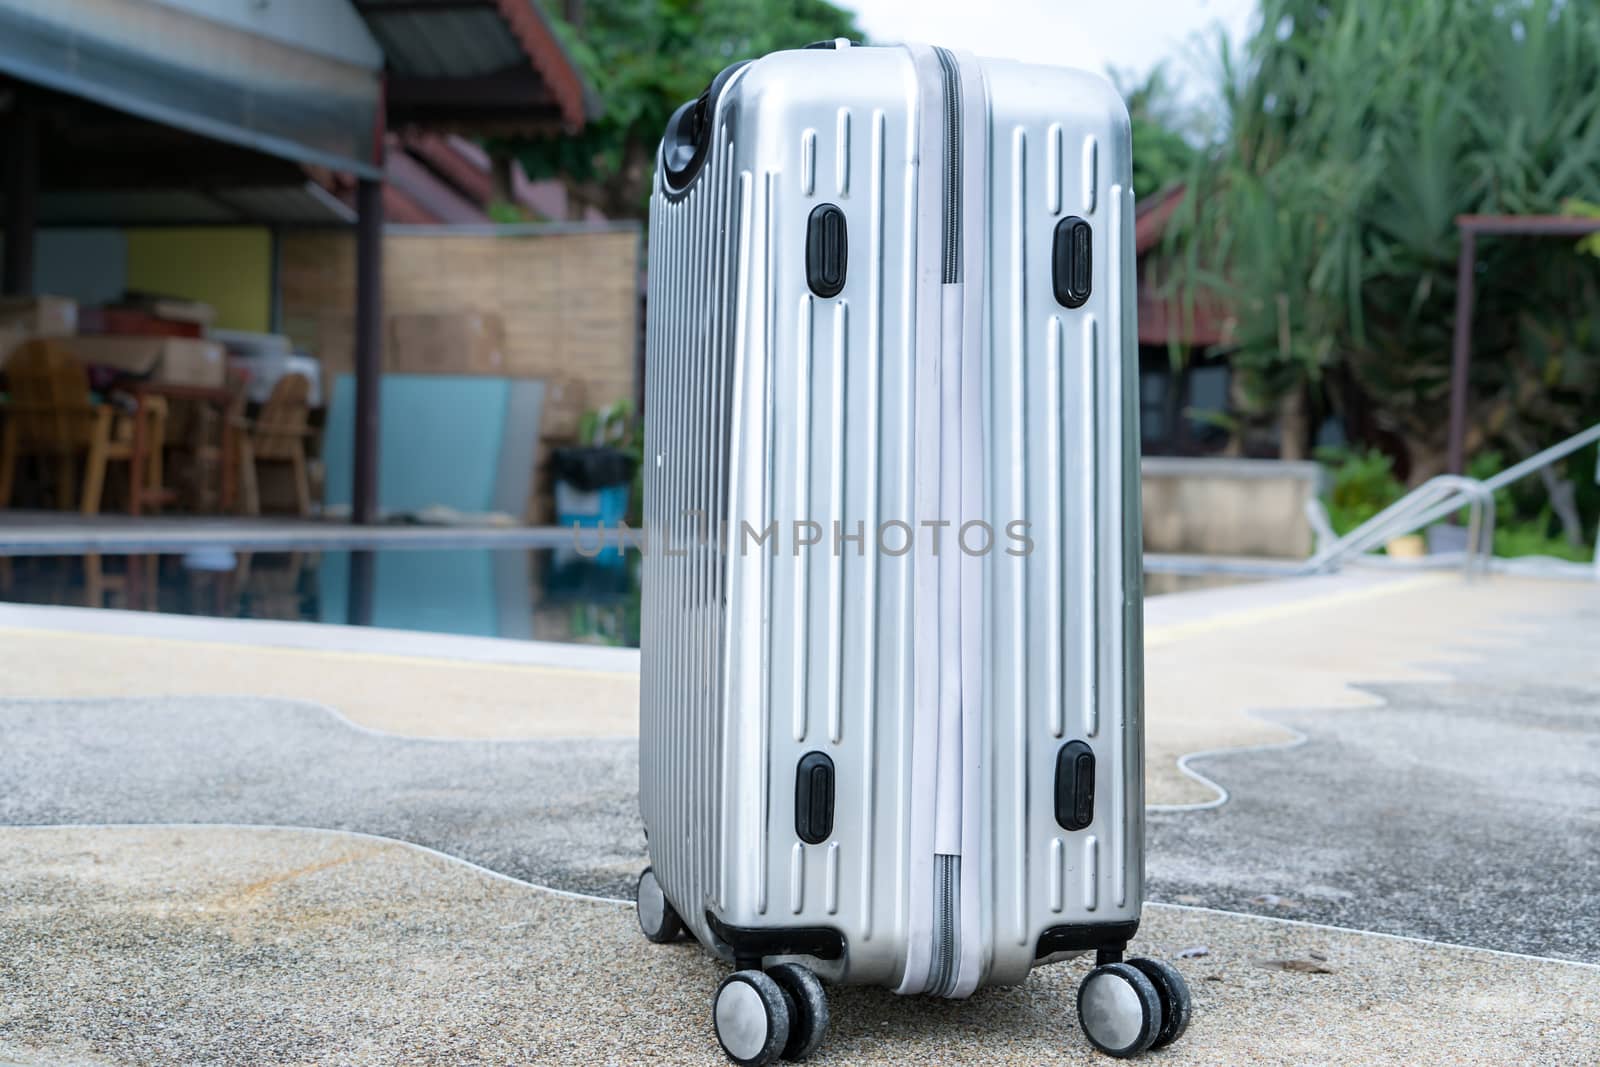 The silver travelling luggage is ready for summer beach and pool by psodaz